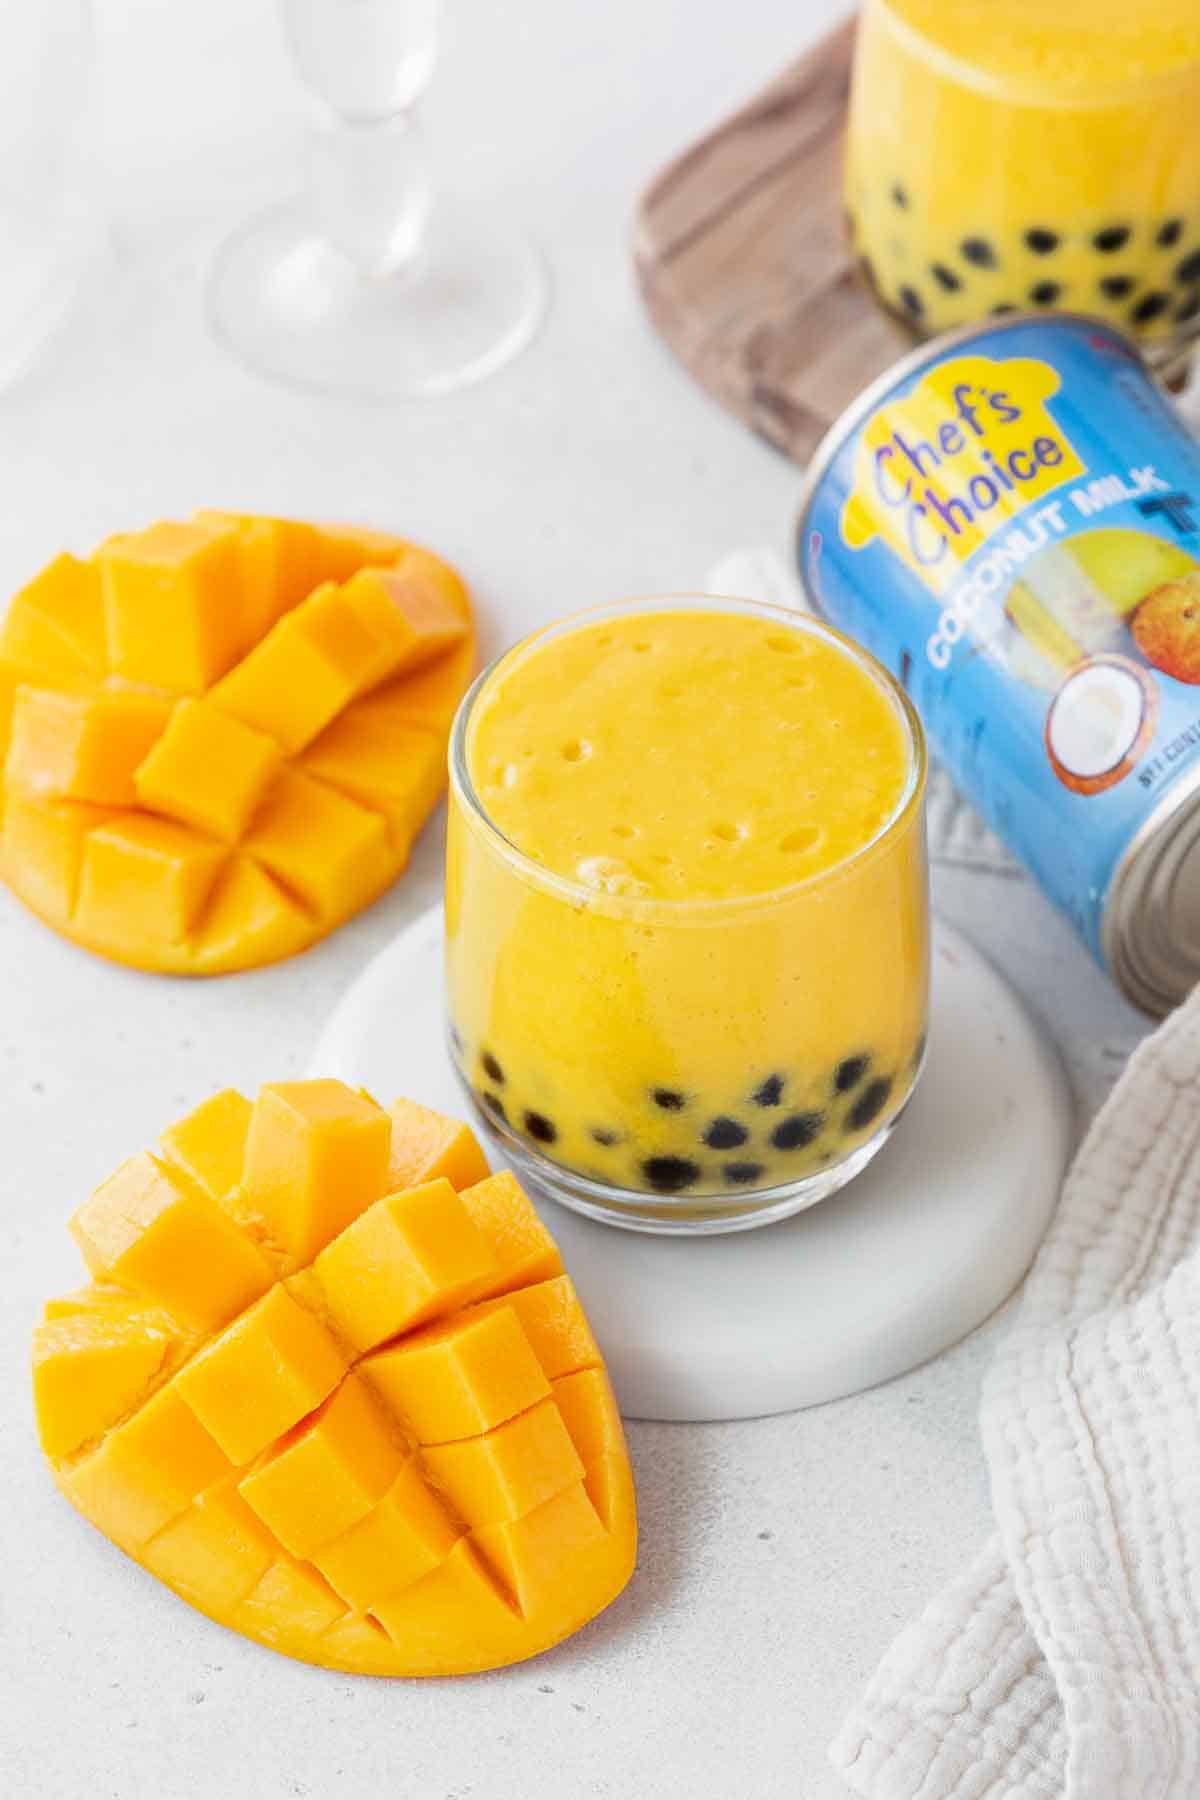 A small glass of the mango boba tea next to a can of chef's choice coconut milk and a cubed mango.